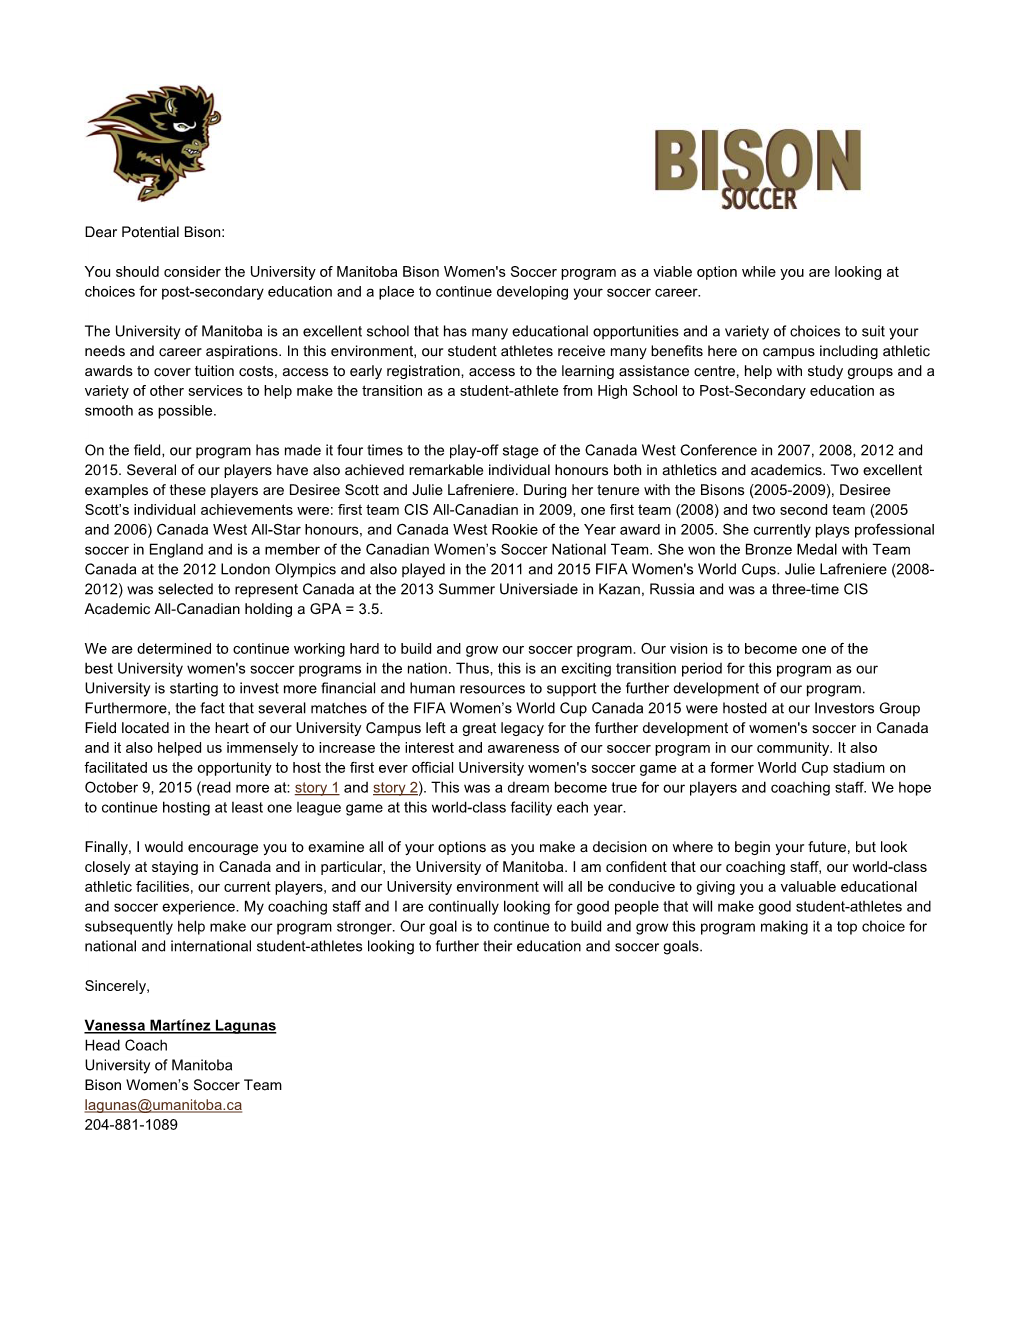 You Should Consider the University of Manitoba Bison Women's Soccer